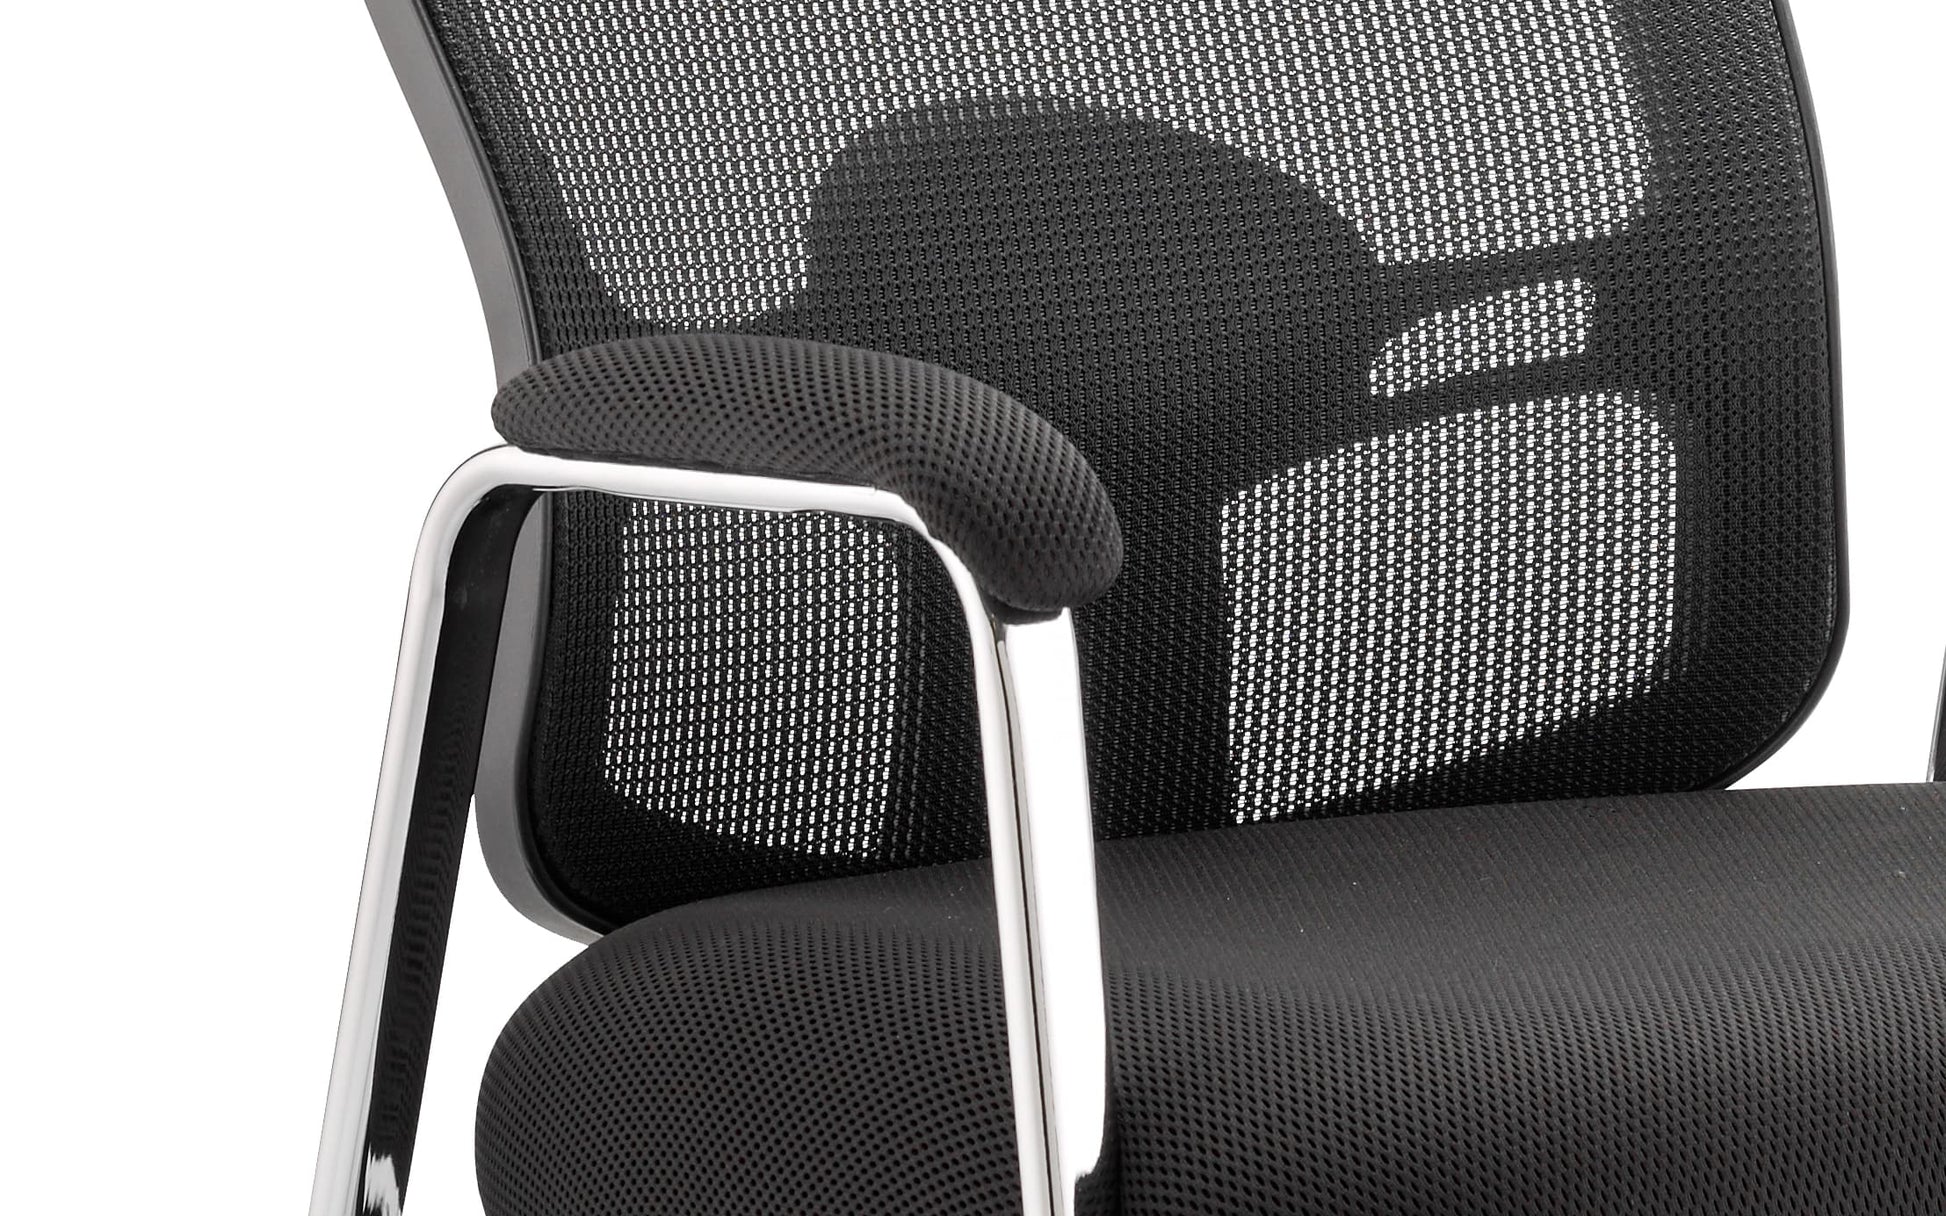 Portland Medium Mesh Back (Straight Leg) Visitor Chair with Arms